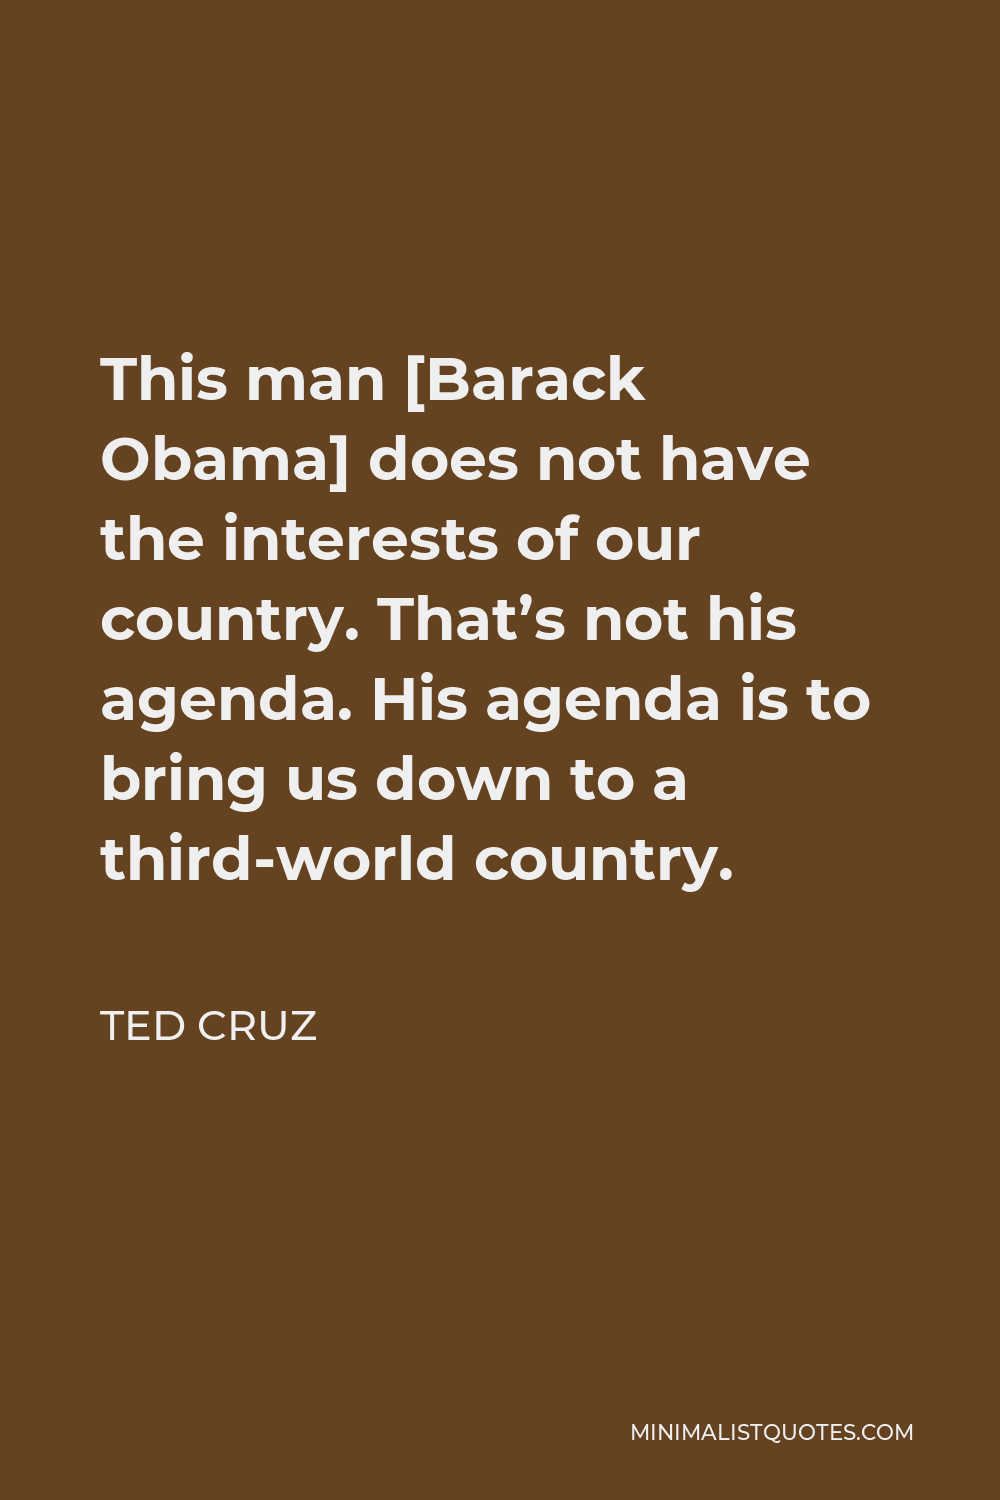 Ted Cruz Quote - This man [Barack Obama] does not have the interests of our country. That’s not his agenda. His agenda is to bring us down to a third-world country.